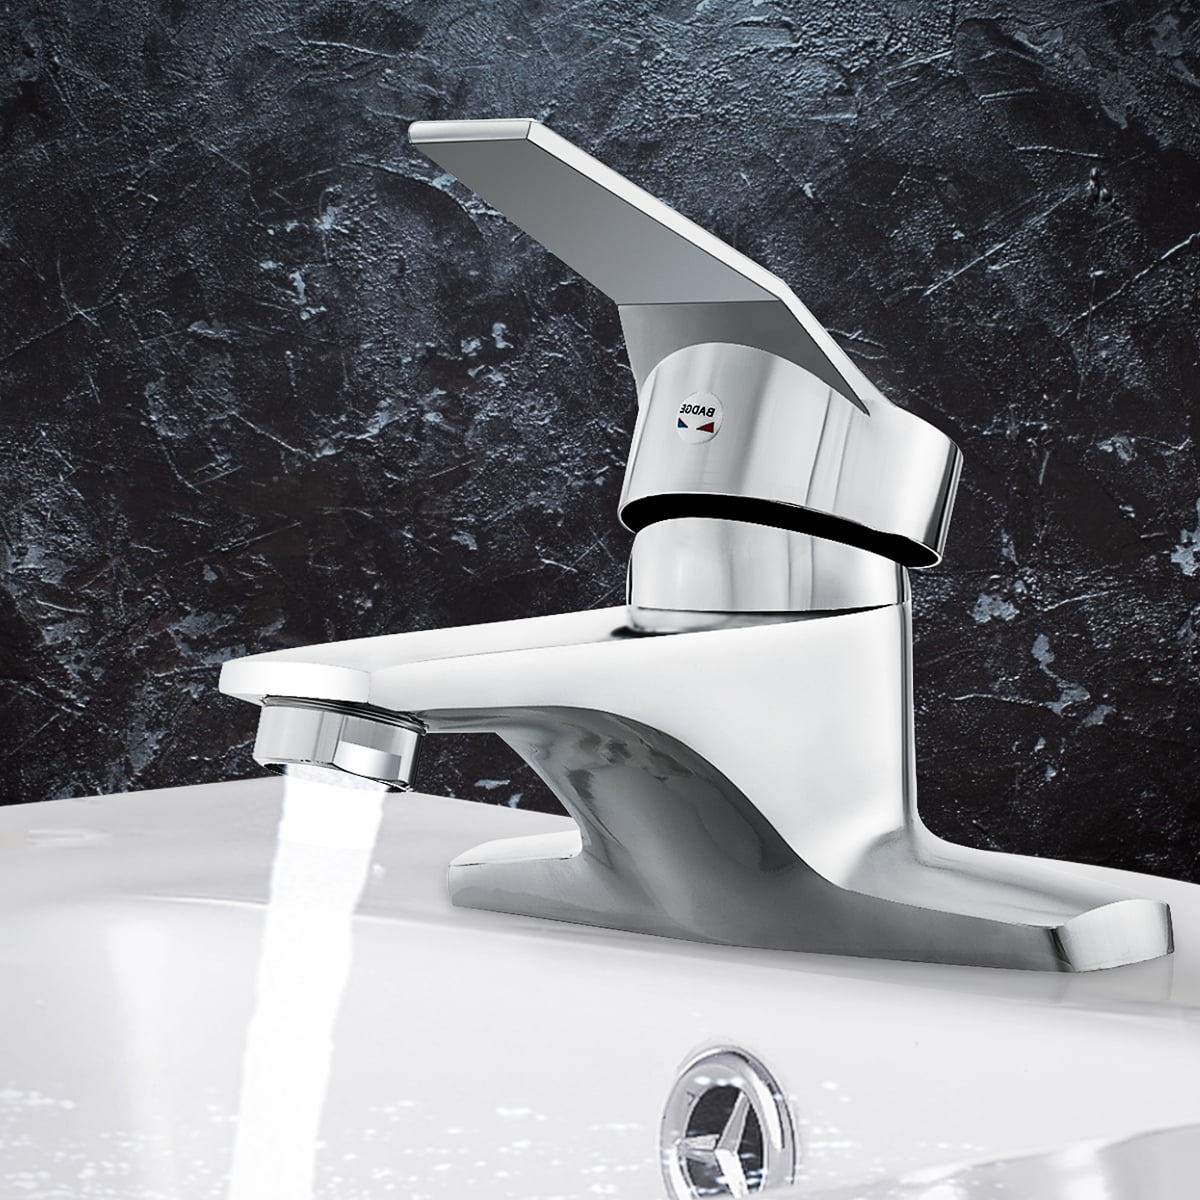 Silver Bathroom Basin Faucet Details about   Sanitary Wares